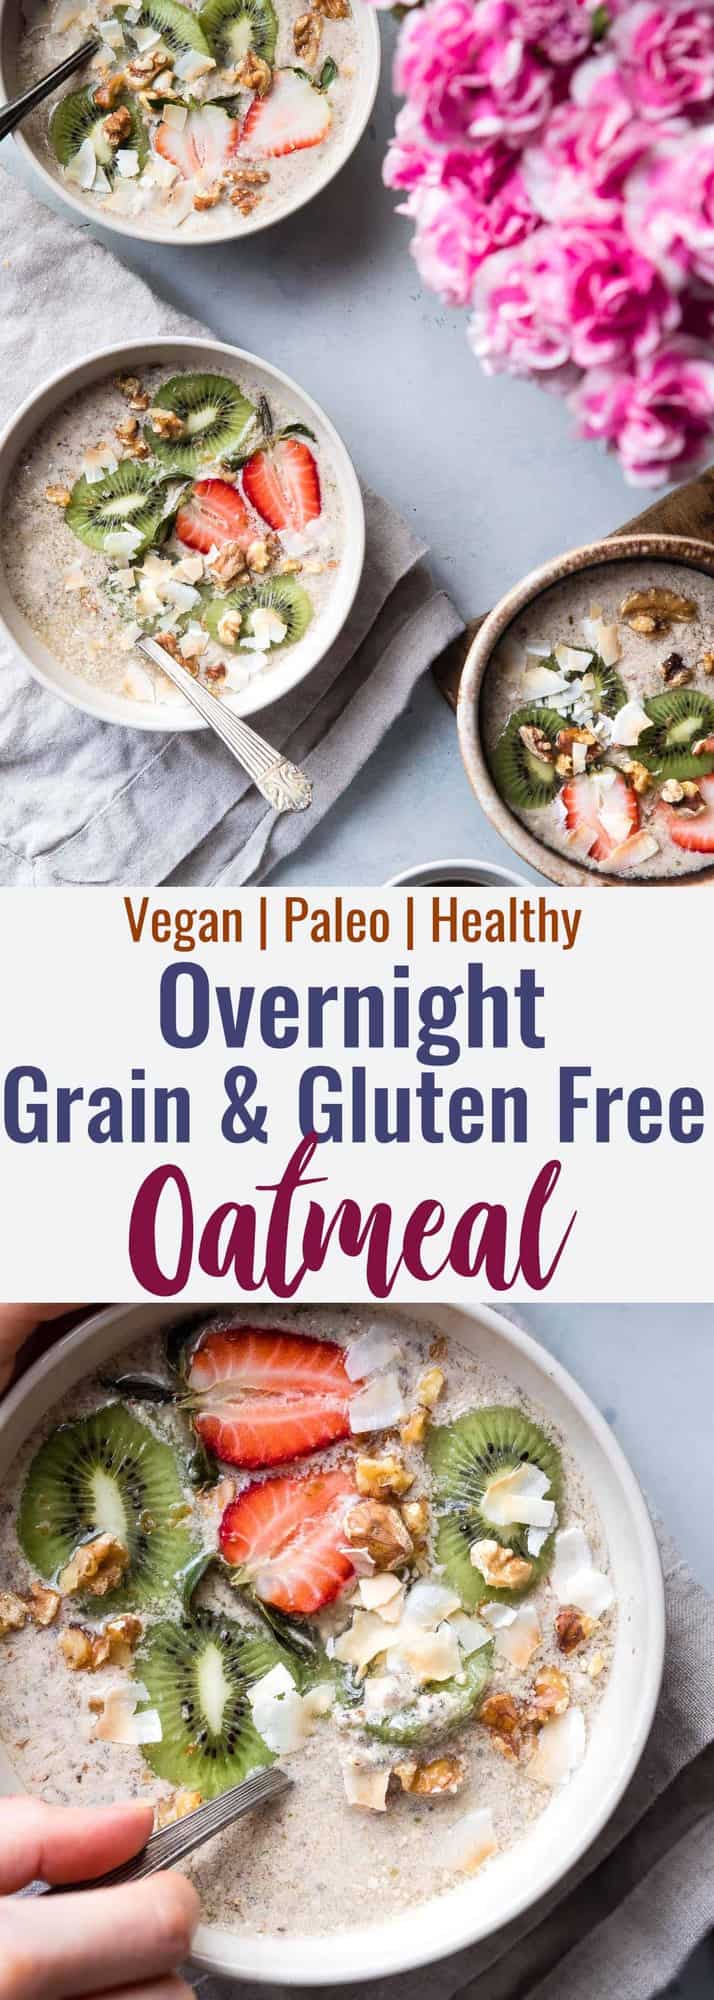 No Oats Paleo Oatmeal - This grain free oatmeal is an EASY, healthy recipe that you can make ahead for busy mornings! Loaded with healthy fat to keep you full too! | #Foodfaithfitness | #Glutenfree #dairyfree #paleo #grainfree #healthy